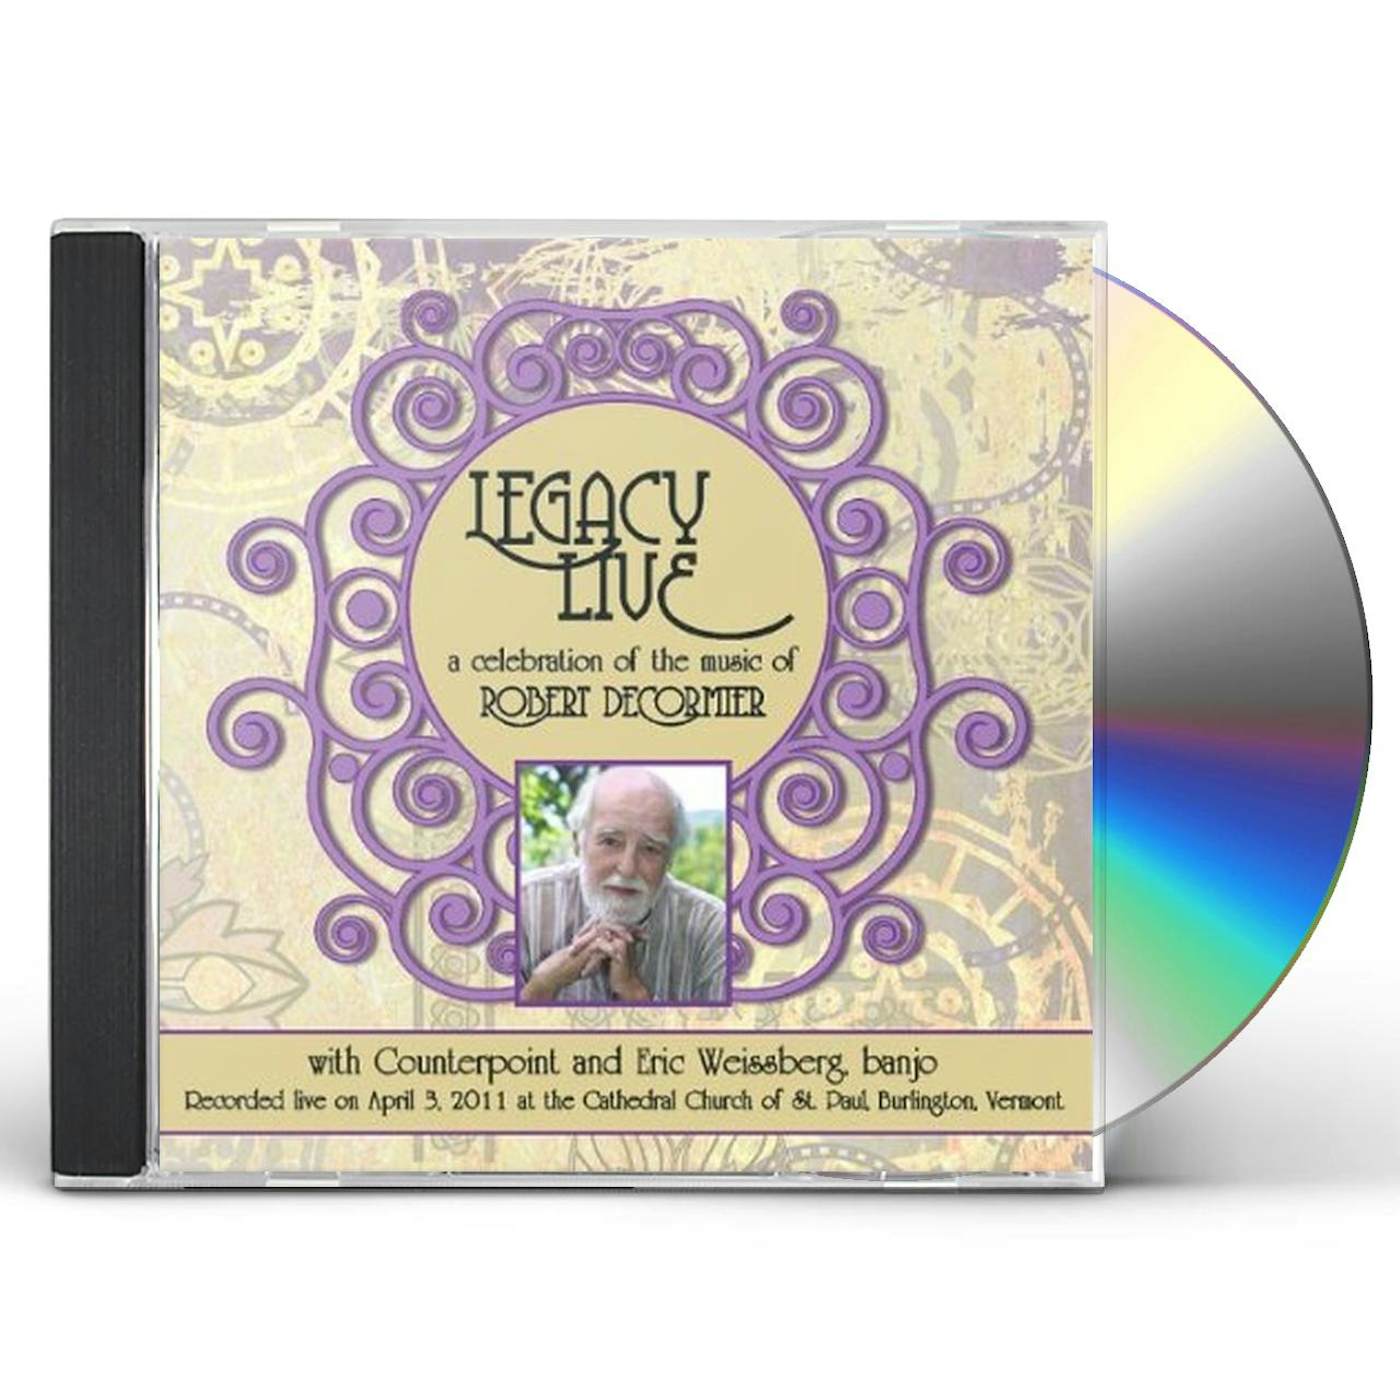 Counterpoint LEGACY LIVE CD